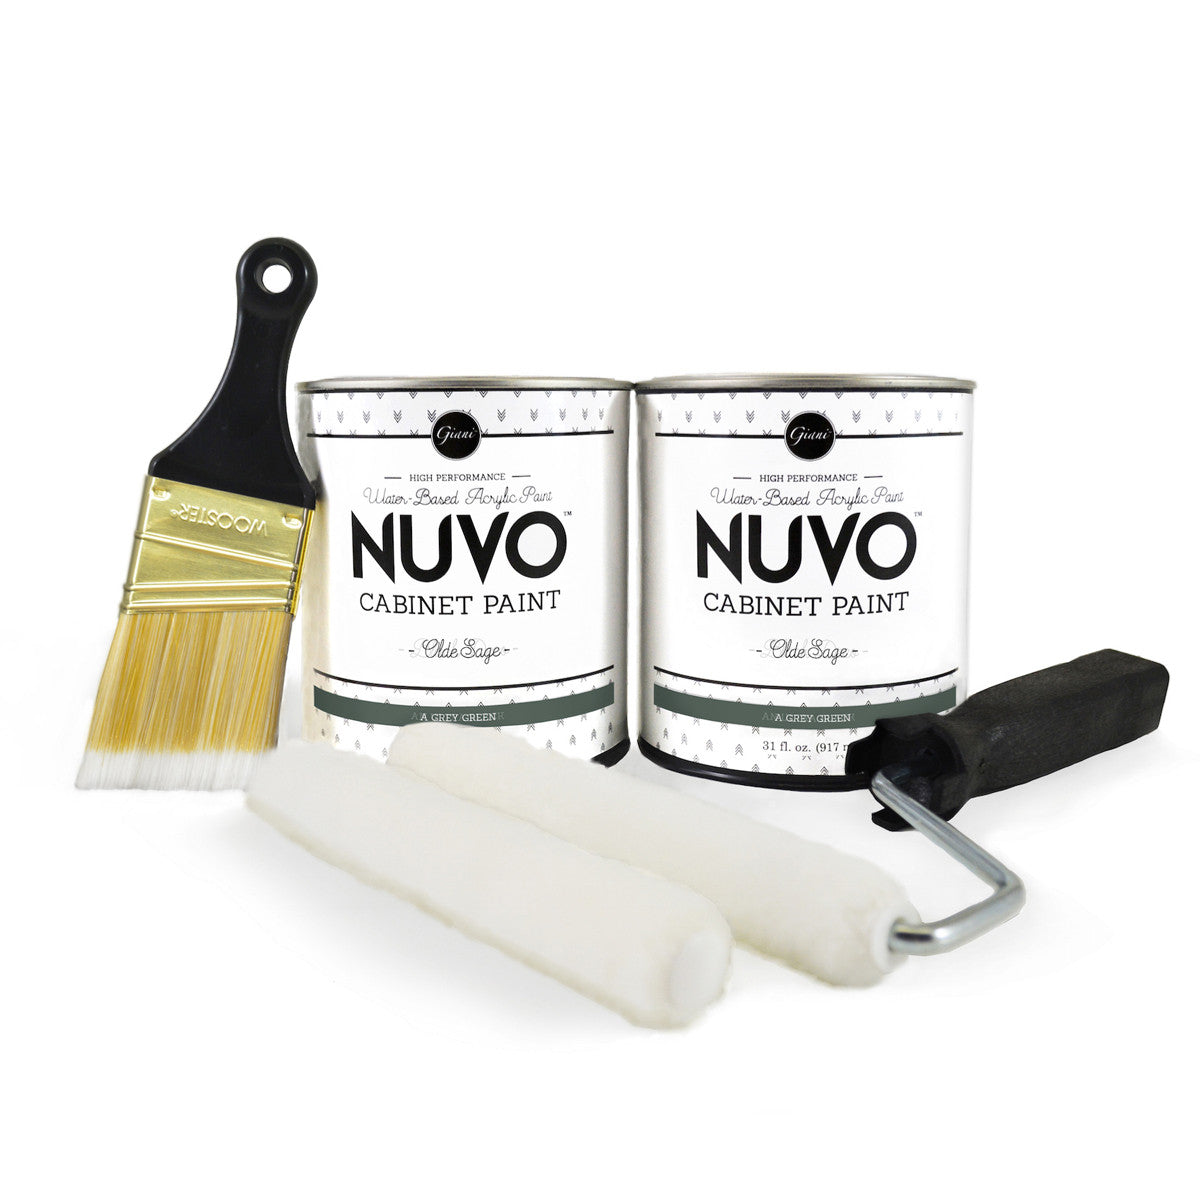 Nuvo Olde Sage Cabinet Paint Kit